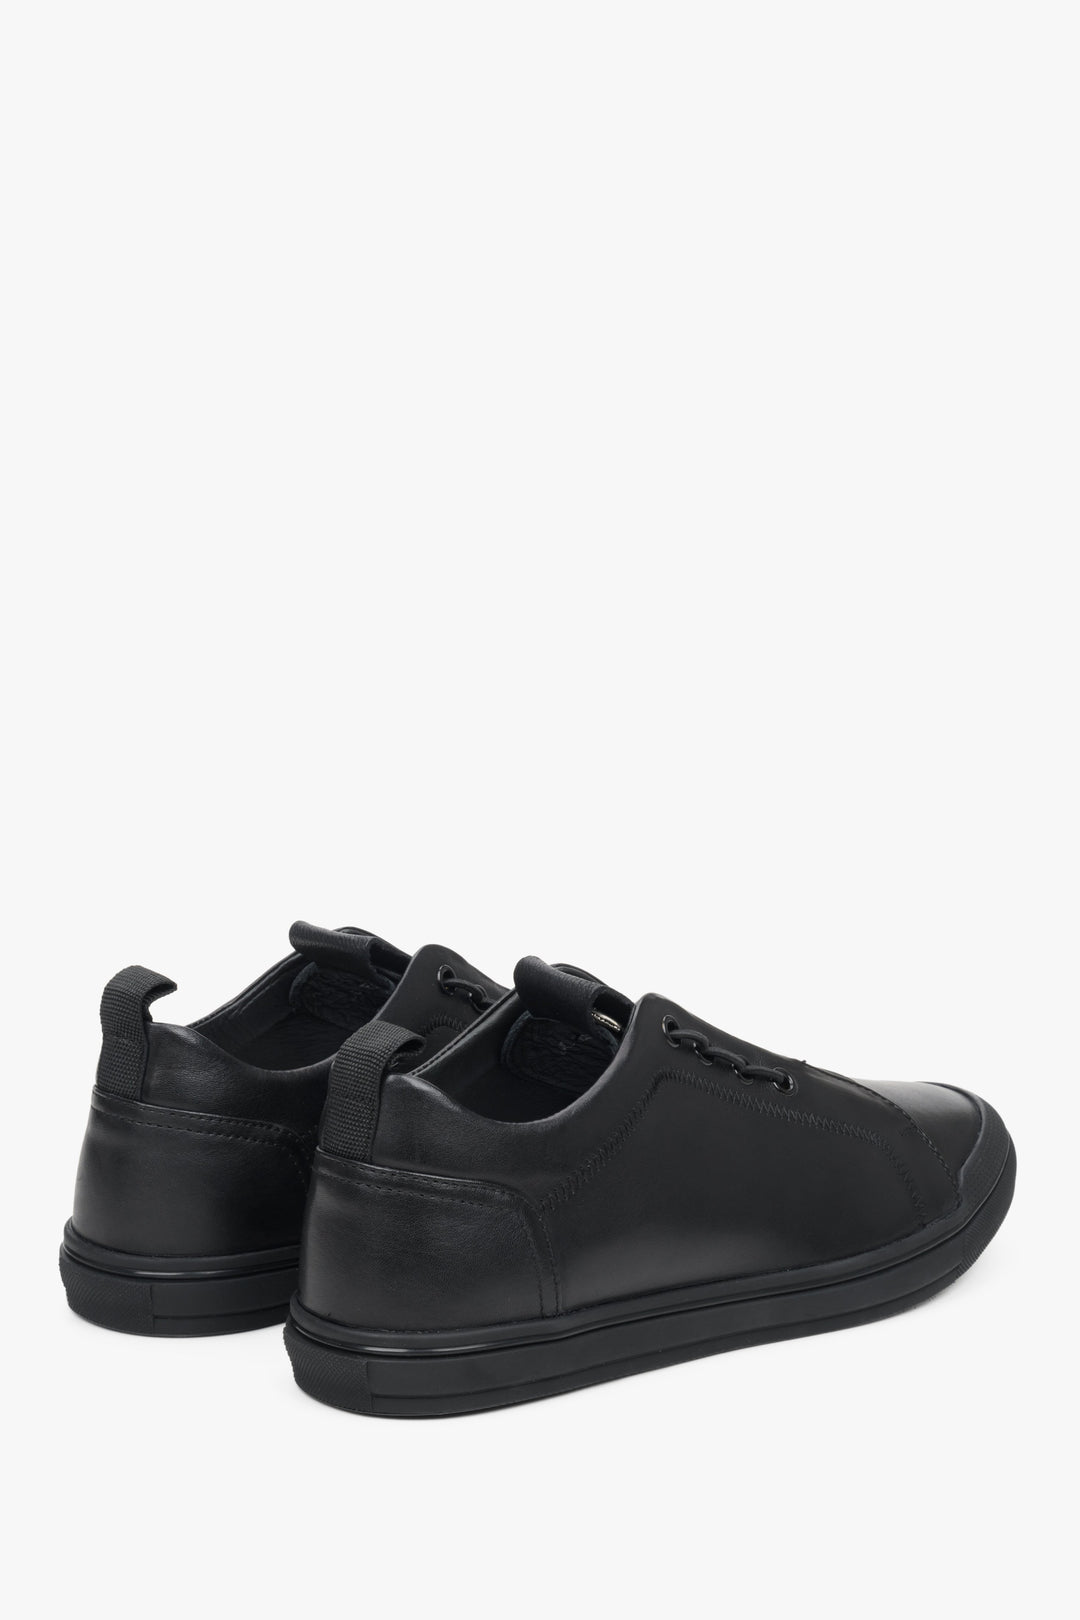 ES 8 men's sneakers made of genuine leather in black - close-up of the heel and side seam.